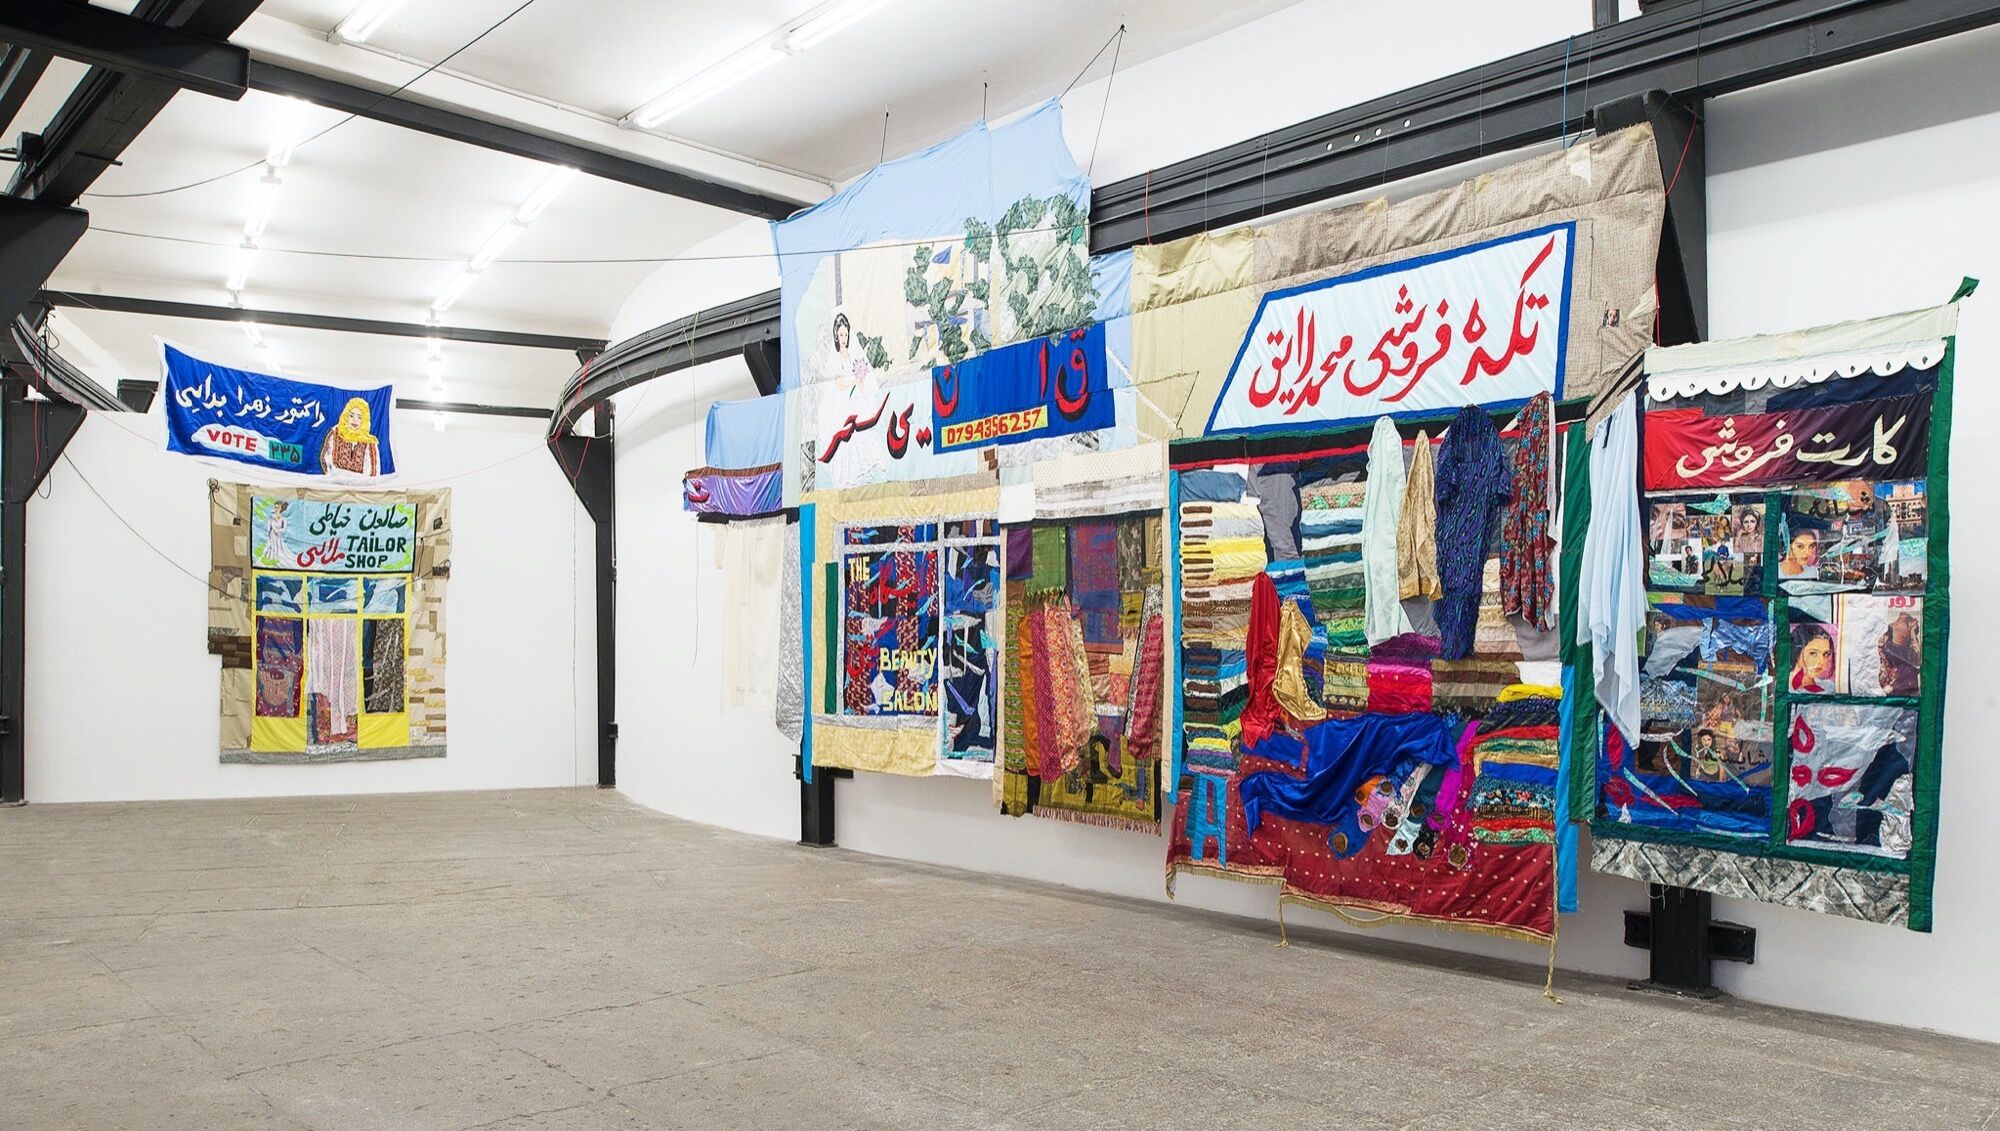 Hangama Amiri, installation view of “Bazaar, A Recollection of Home,” 2020, at T293, Rome. Photo by Roberto ApaCourtesy of the artist and T293.